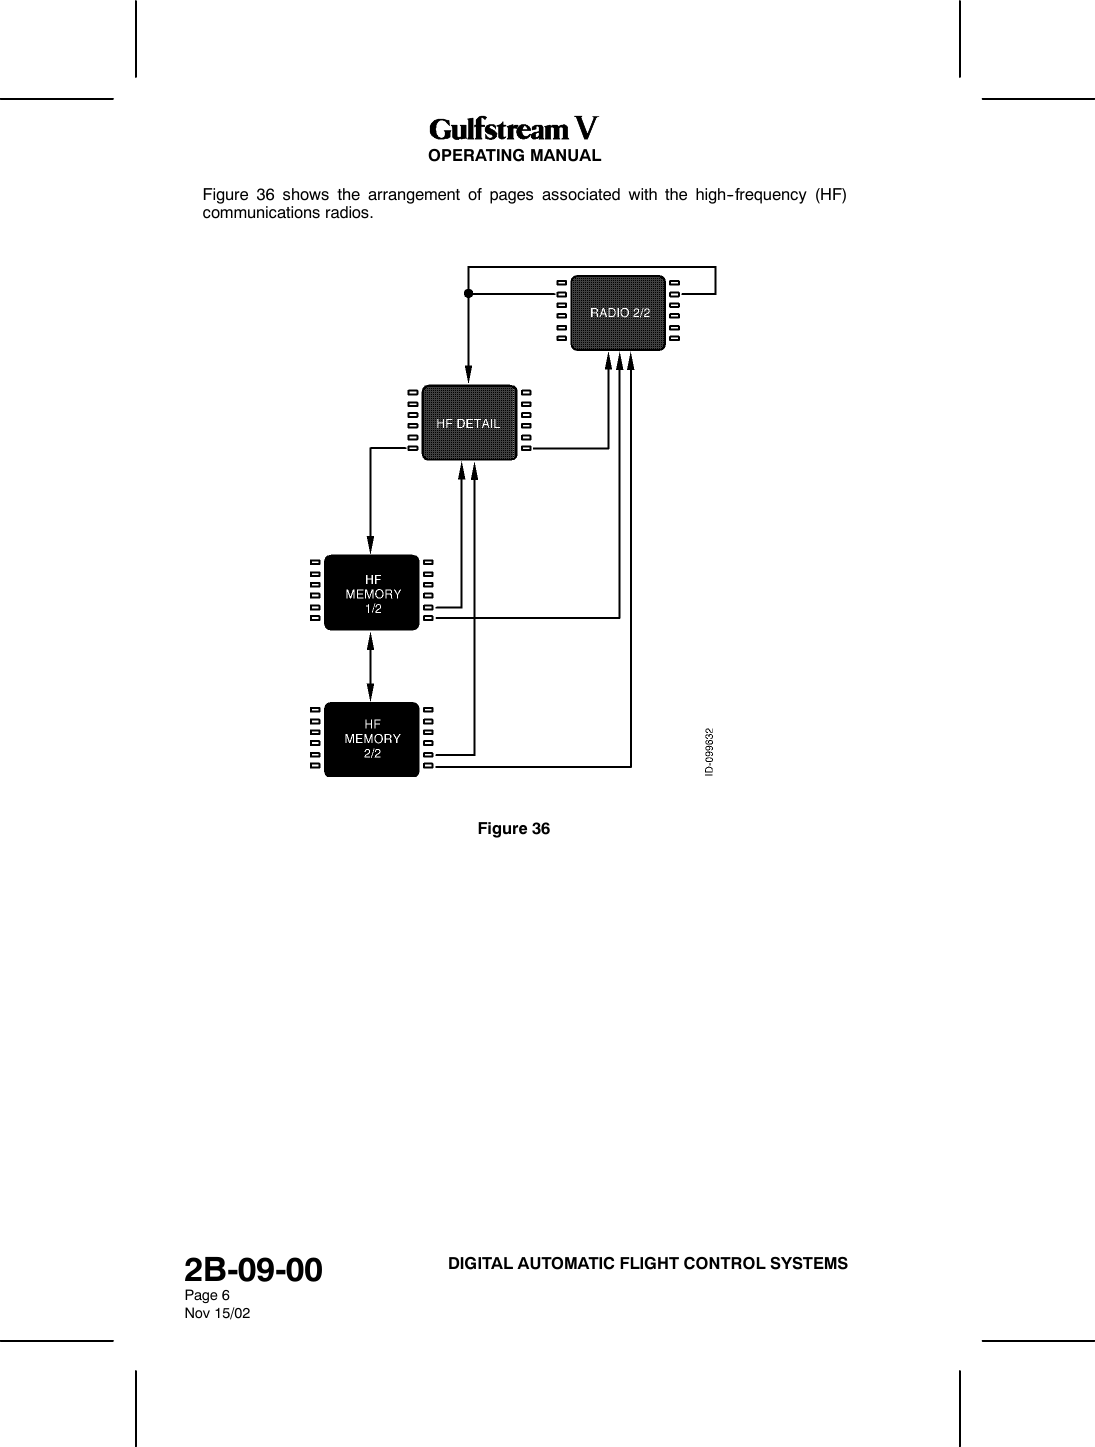 OPERATING MANUAL2B-09-00Page 6Nov 15/02DIGITAL AUTOMATIC FLIGHT CONTROL SYSTEMSFigure 36 shows the arrangement of pages associated with the high--frequency (HF)communications radios.Figure 36